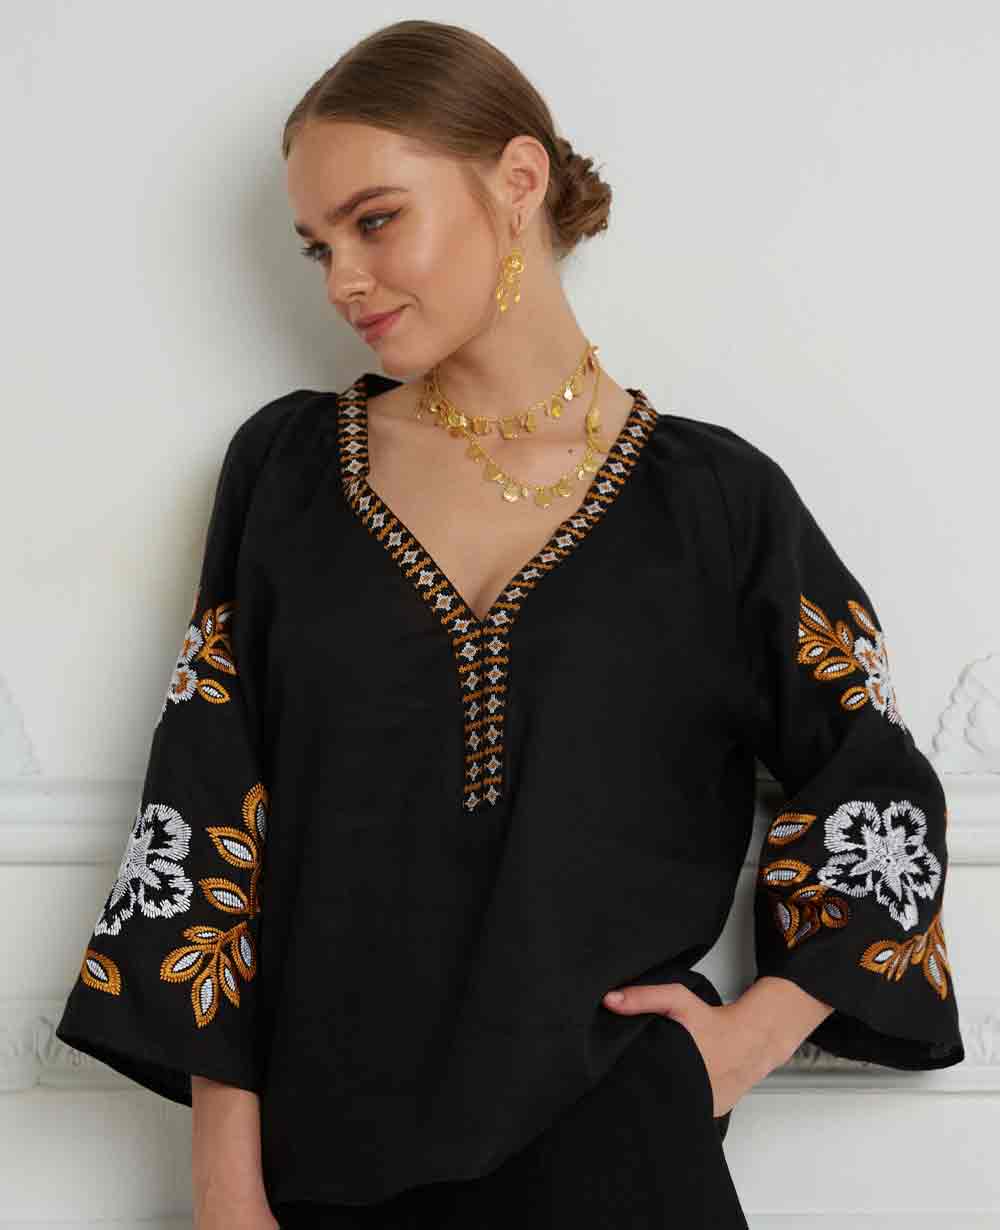 EMBROIDERED LINEN BLOUSE "ANTIGUA"